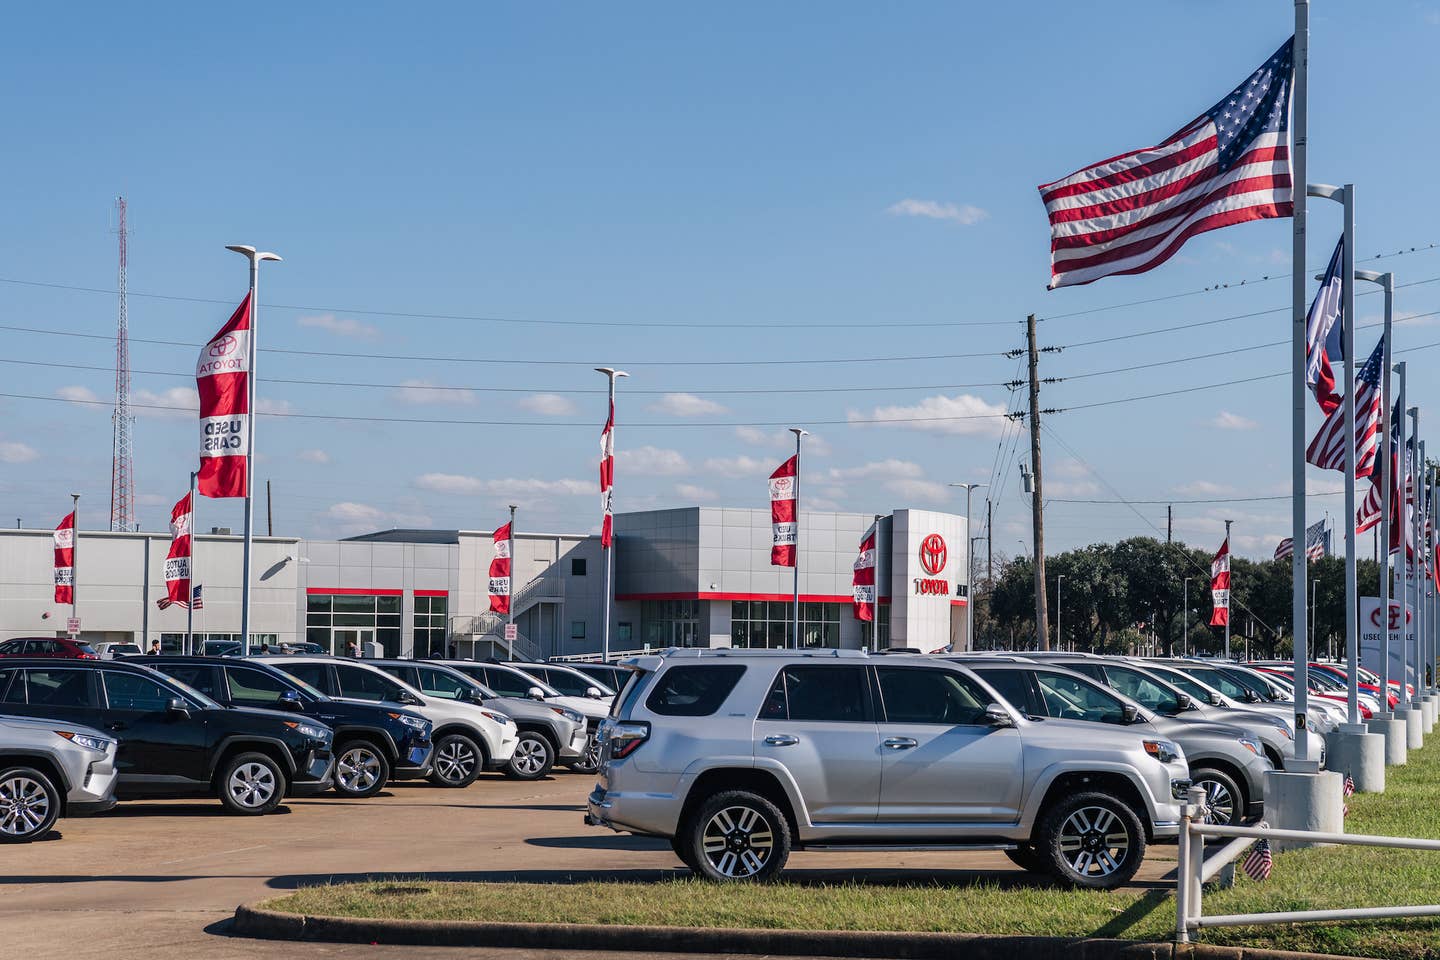 HOUSTON, TEXAS - JANUARY 04: Vehicles sit on the lot at the Joe Myers Toyota dealership on January 04, 2022 in Houston, Texas. Toyota Motor Corp has been ranked the No. 1 automaker in America after surpassing General Motors in auto sales for the first time since 1931. Automakers reported Toyota having sold 2.332 million vehicles in the United States, in 2021, compared to 2.218 million for General Motors. (Photo by Brandon Bell/Getty Images)